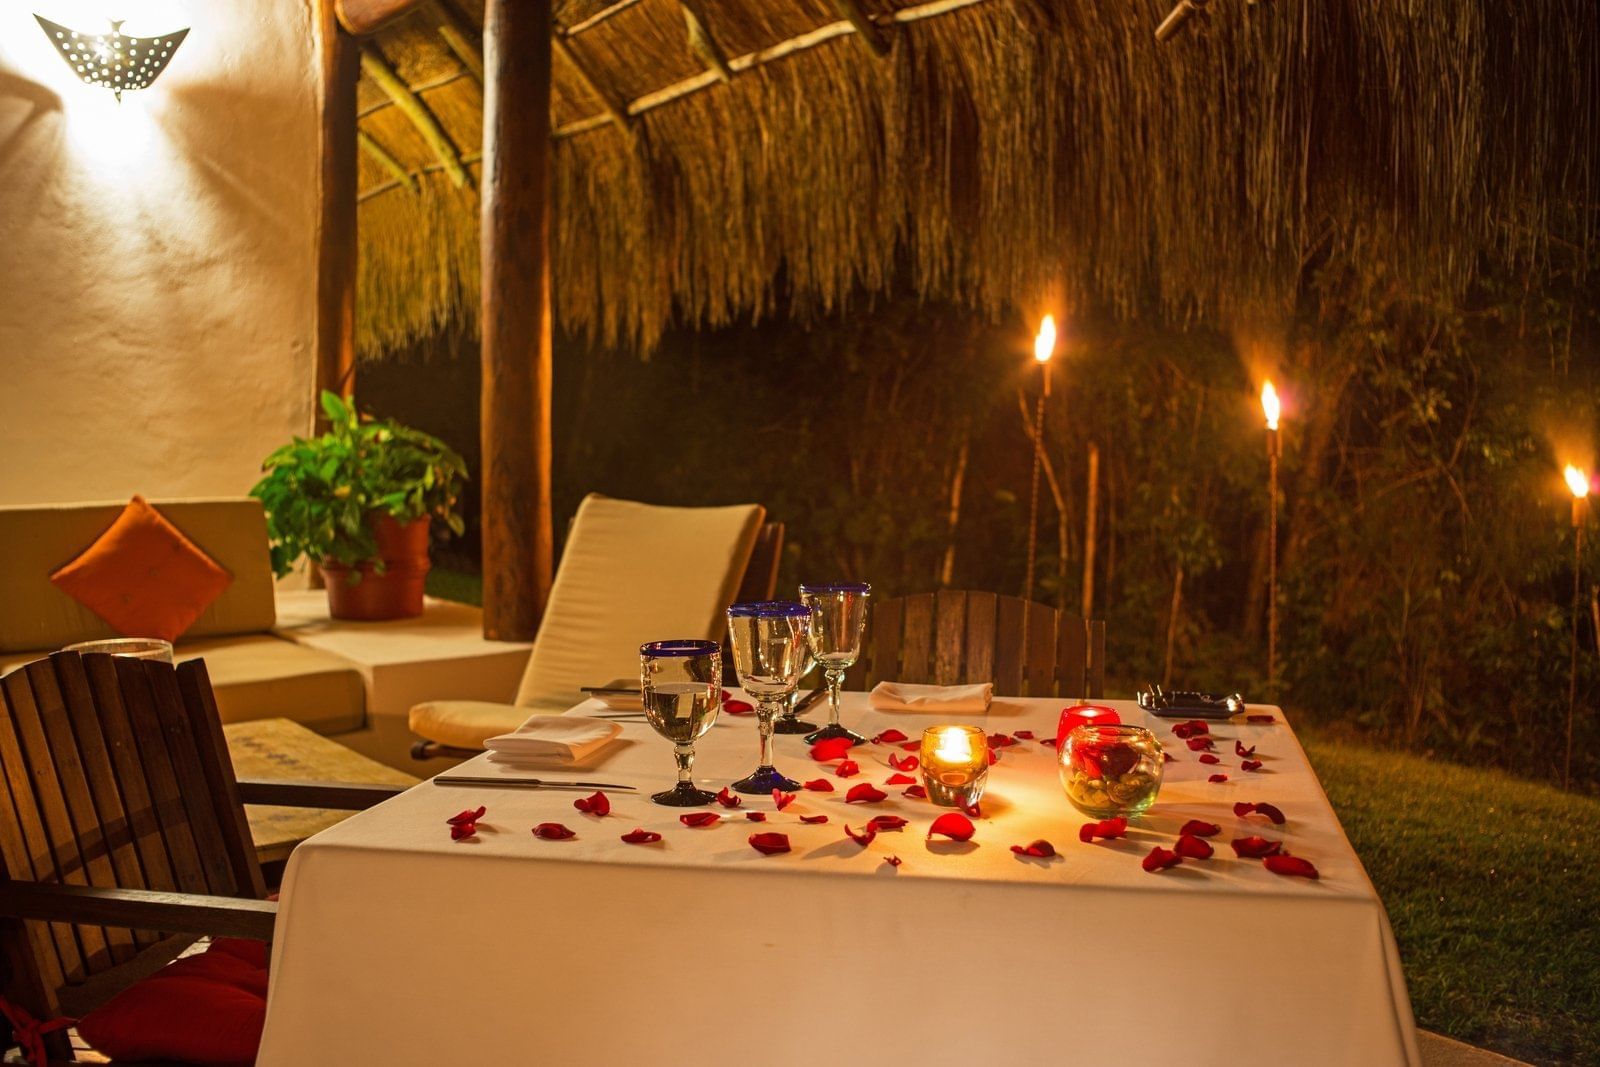 Romantic Dining with flower decor at The Explorean Kohunlich

